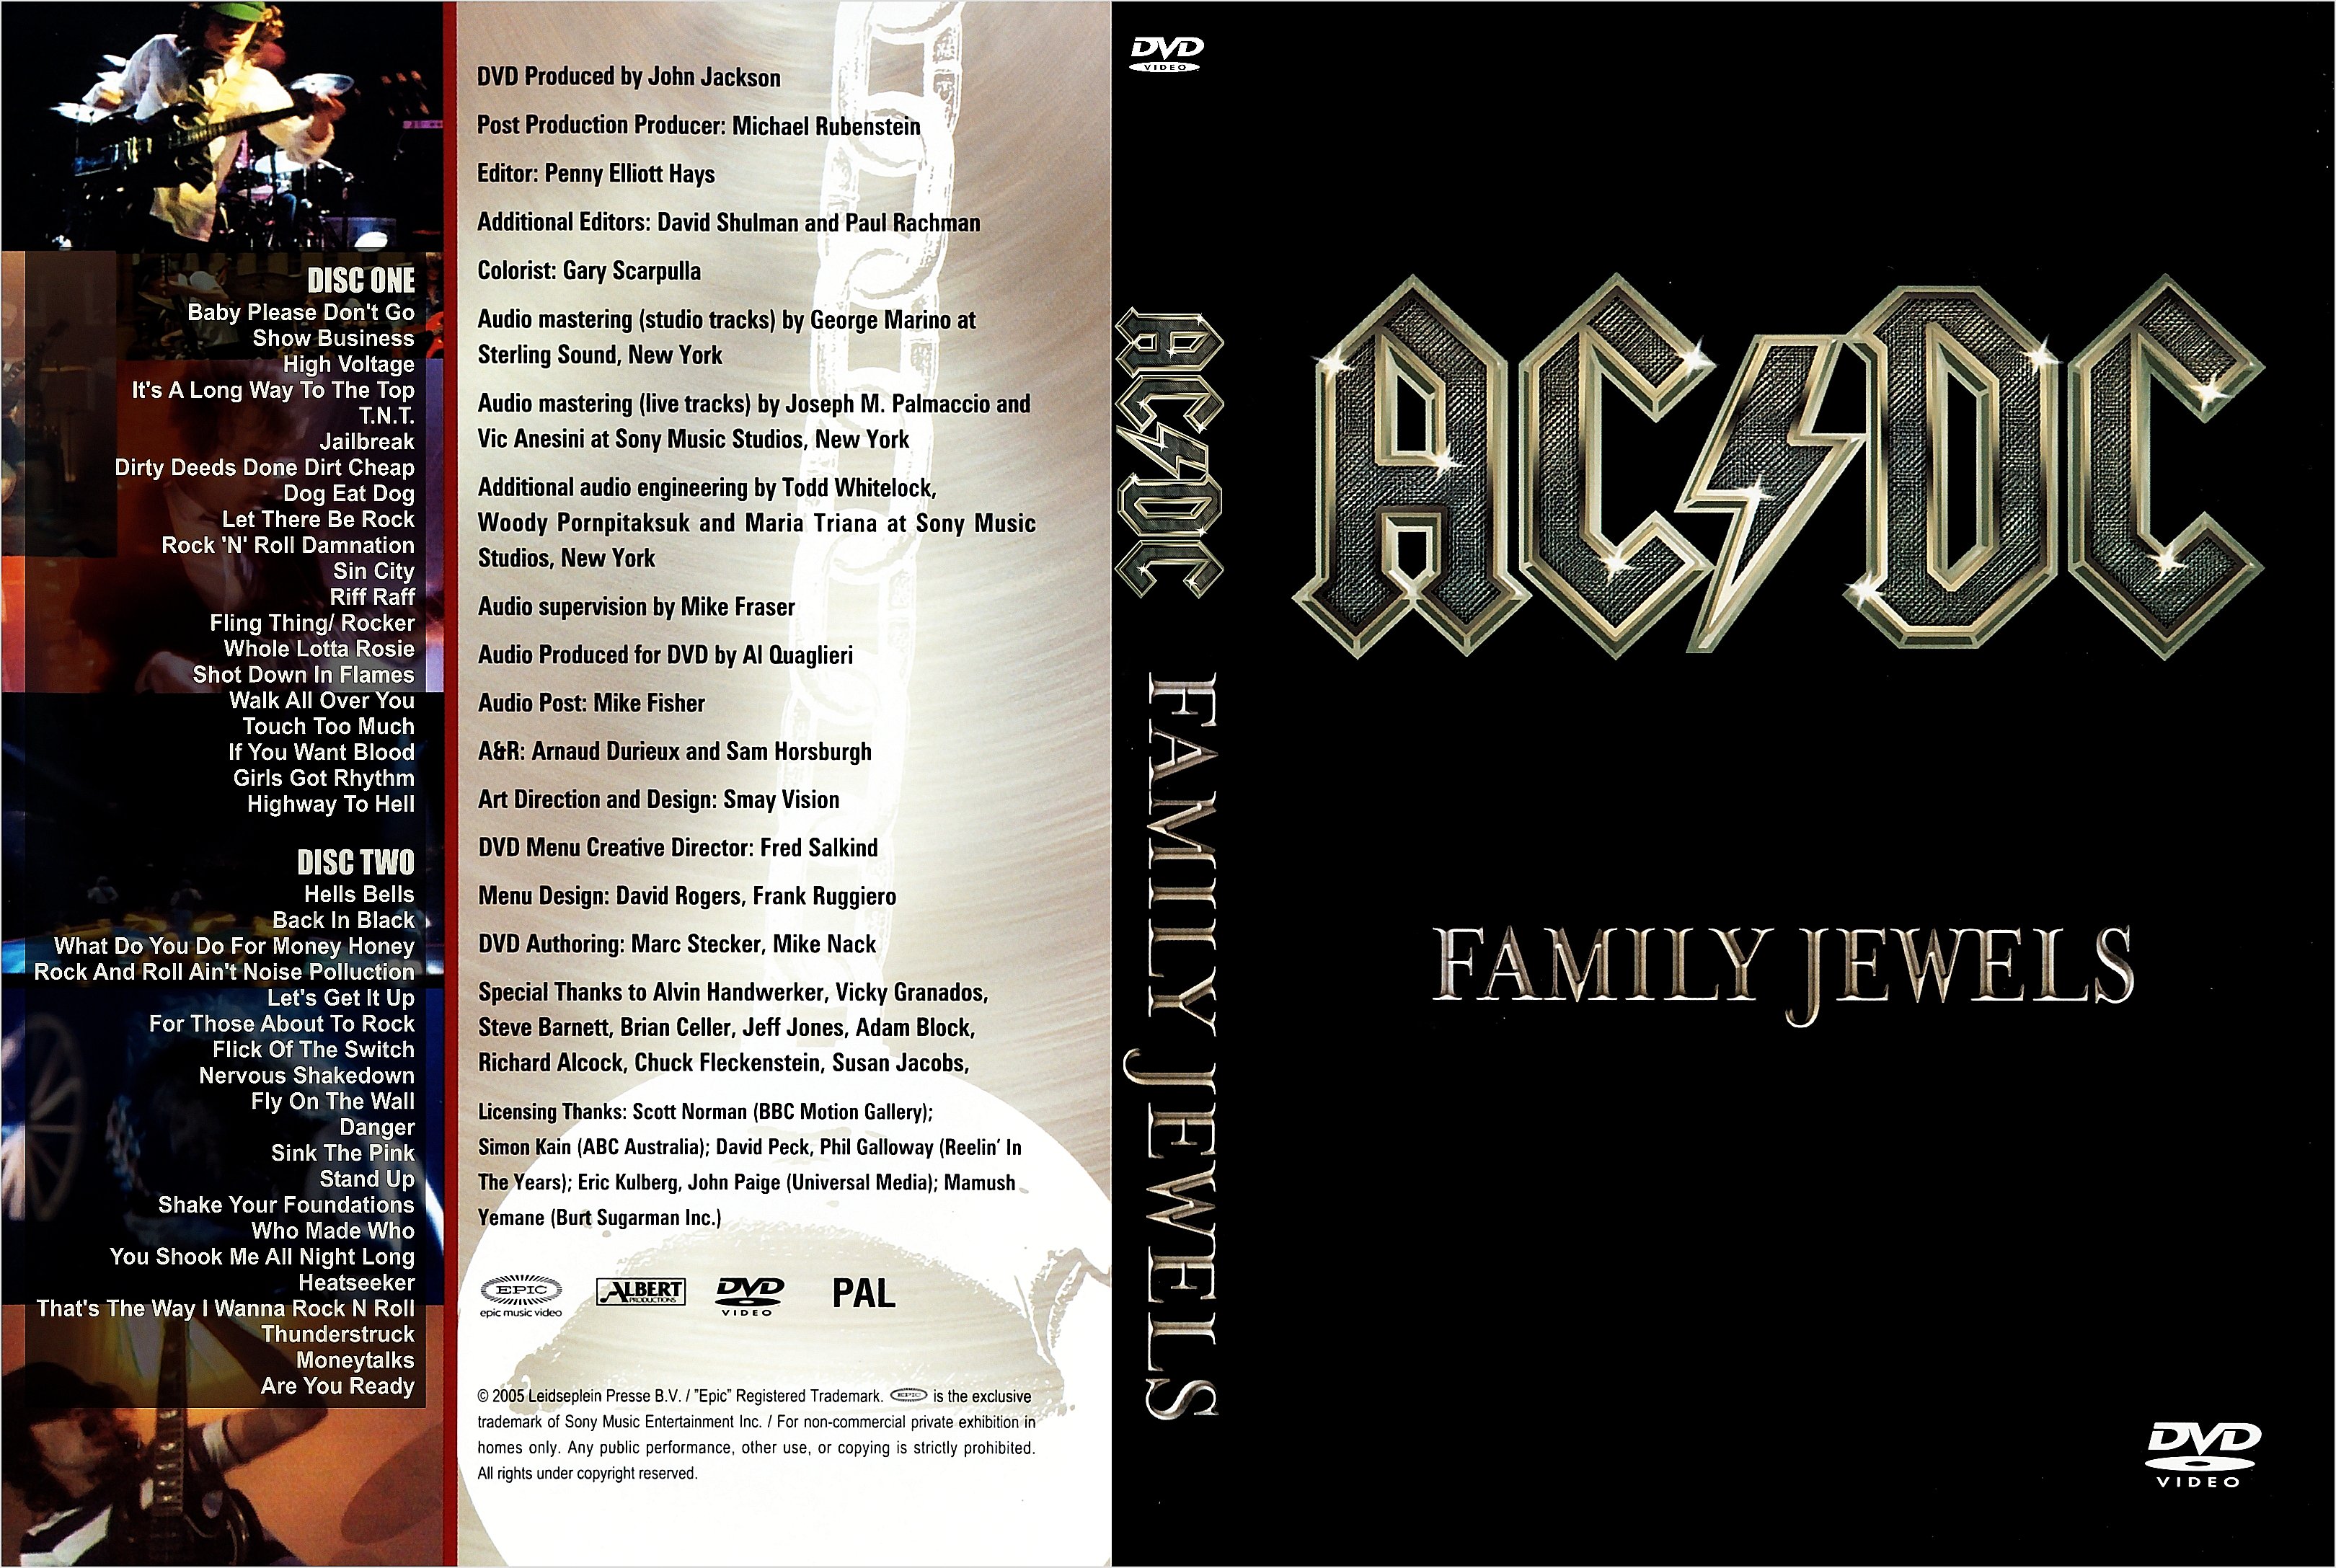 Jaquette DVD ACDC family jewels v2